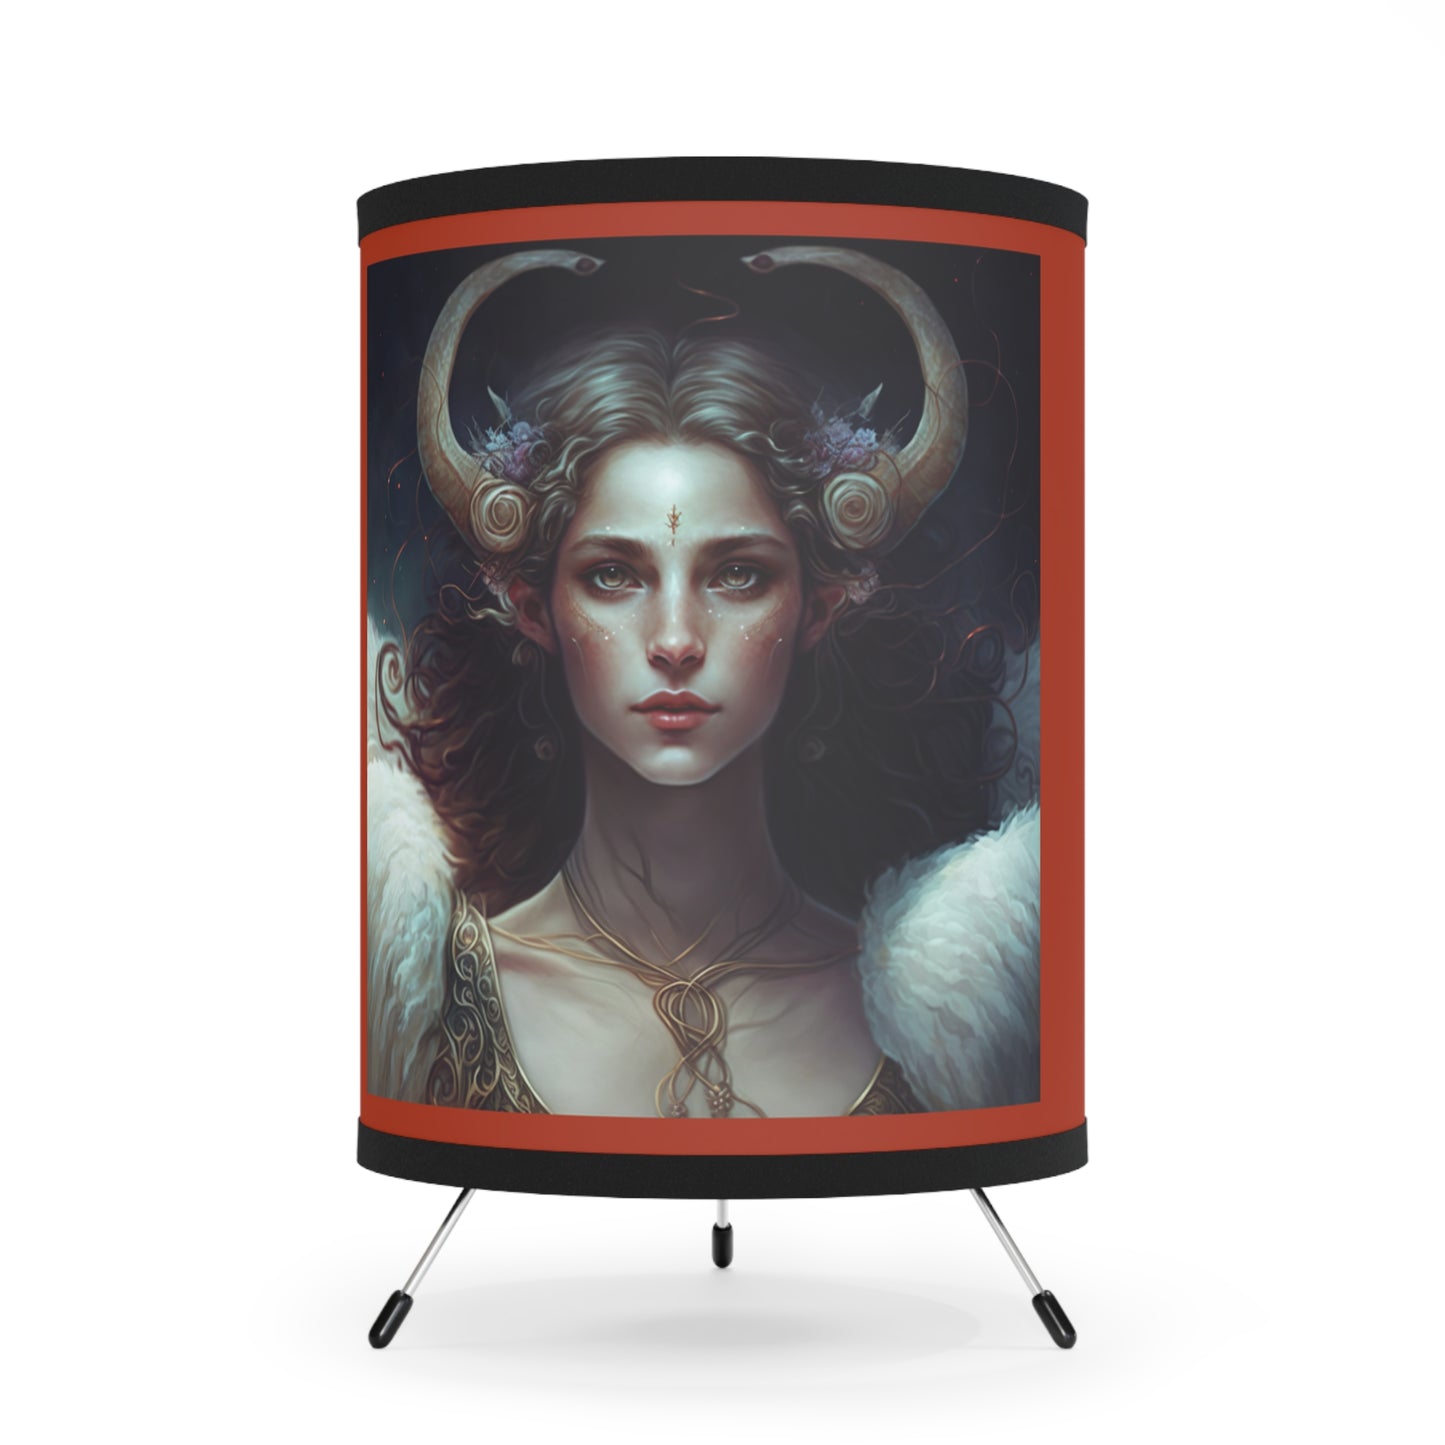 Aries Warrior Goddess with Inspirational Poem Tripod Lamp with Printed Shade, US\CA plug